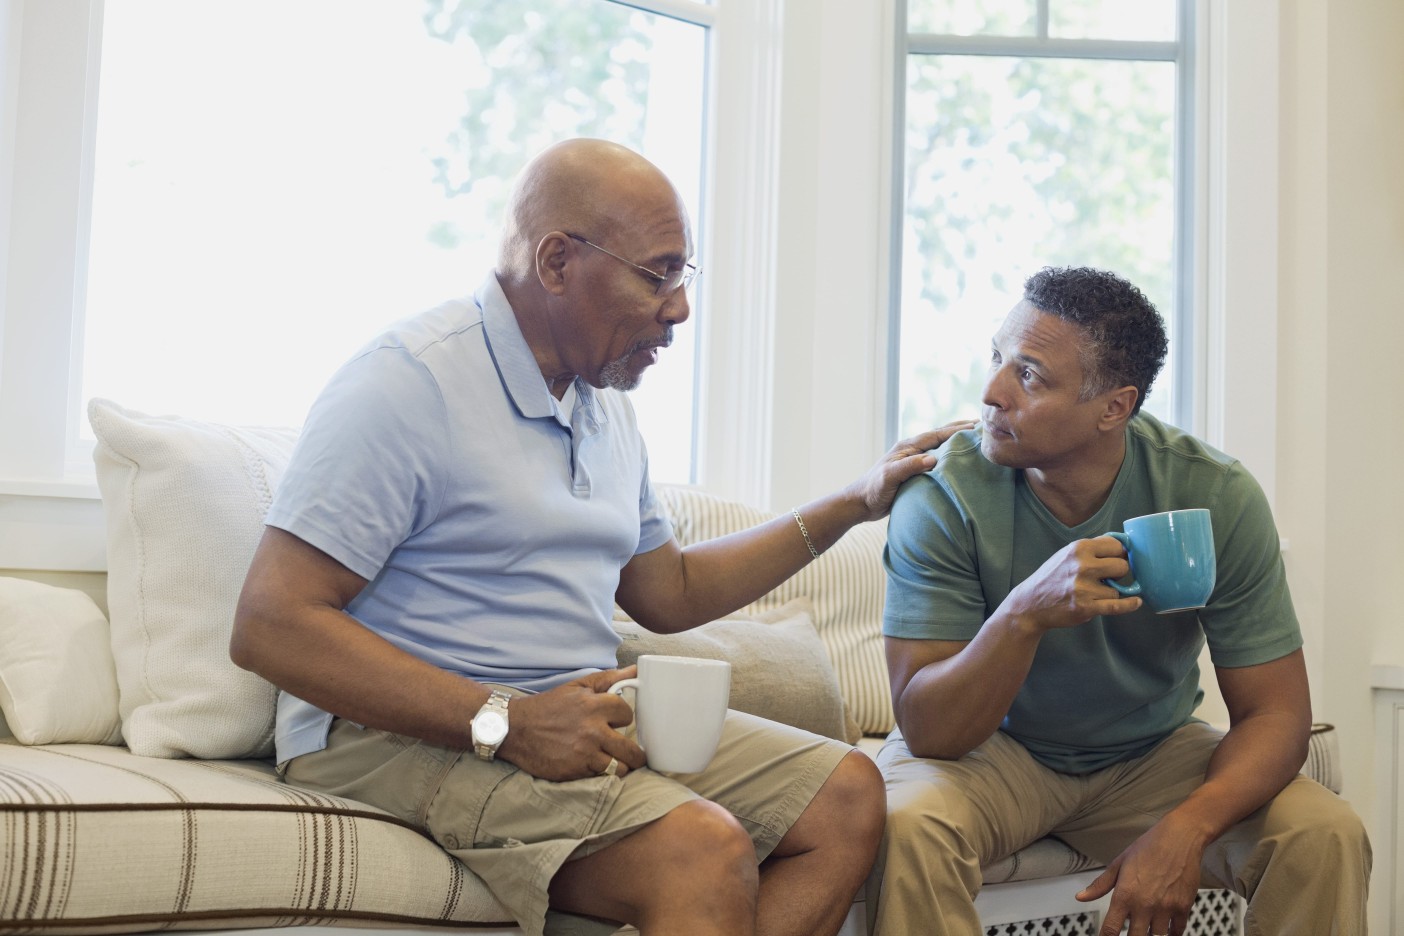 Two men with coffee discuss gastrointestinal cancer support groups in a well lit living room